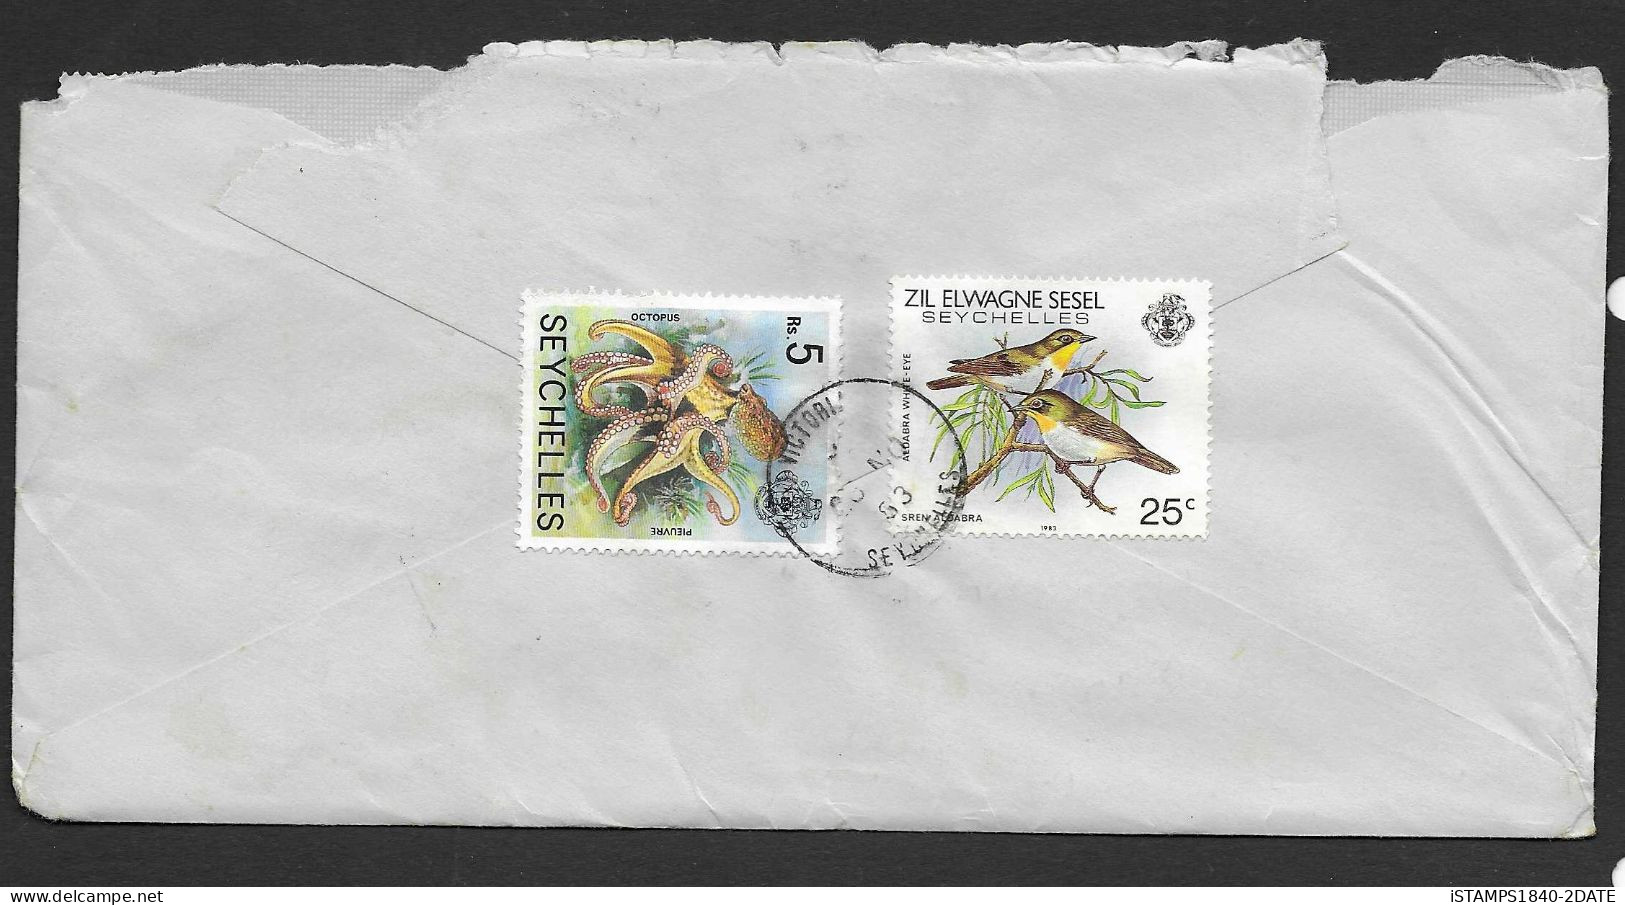 00462/ Seychelles 1983 Cover Birds Issues Short Set Nice Cover - Seychelles (...-1976)